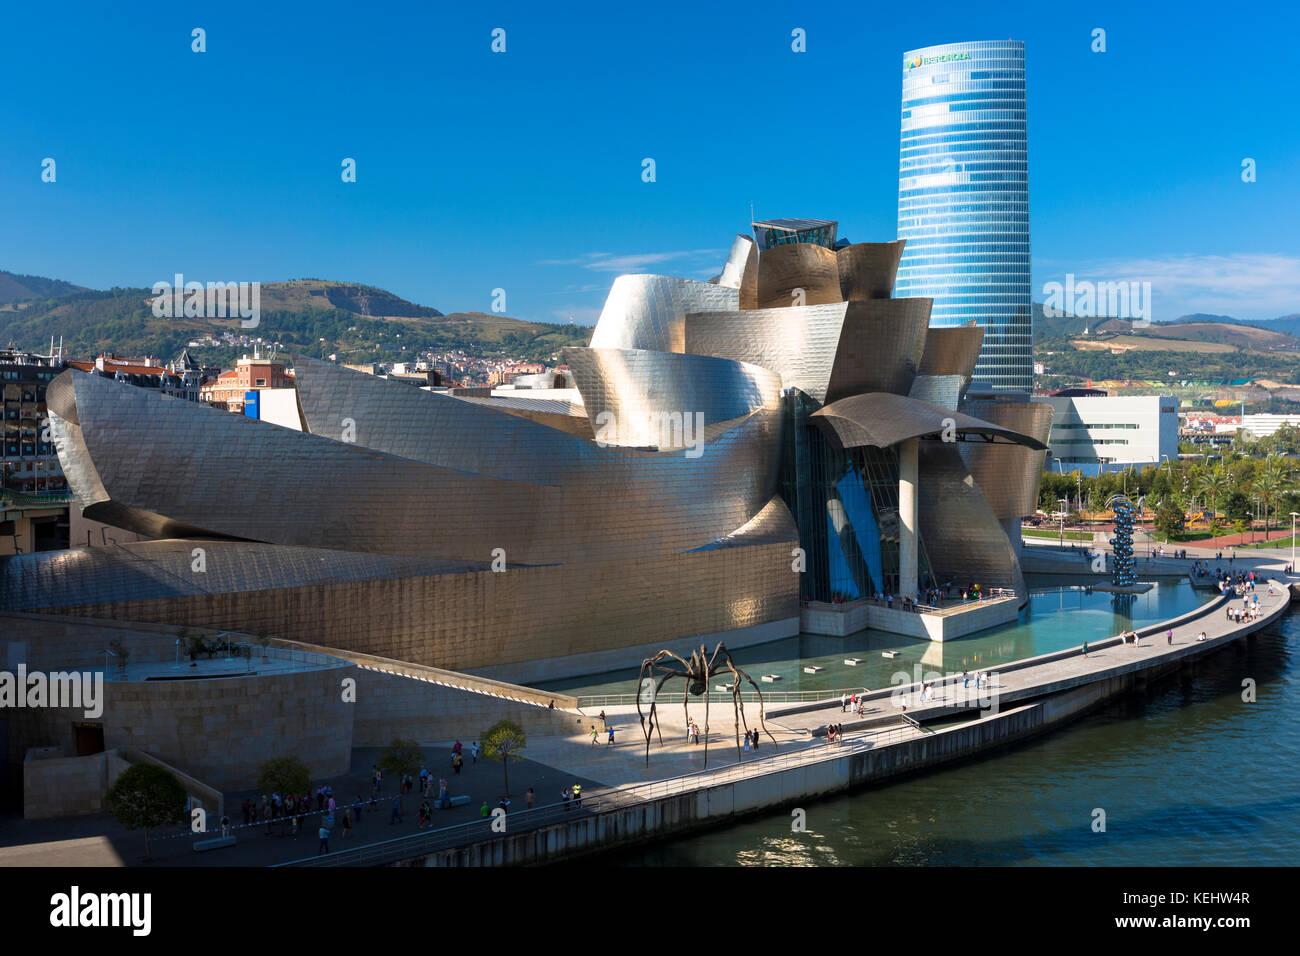 Frank Gehry's Guggenheim Museum, The Spider sculpture, Iberdrola Tower and River Nervion at Bilbao, Spain Stock Photo